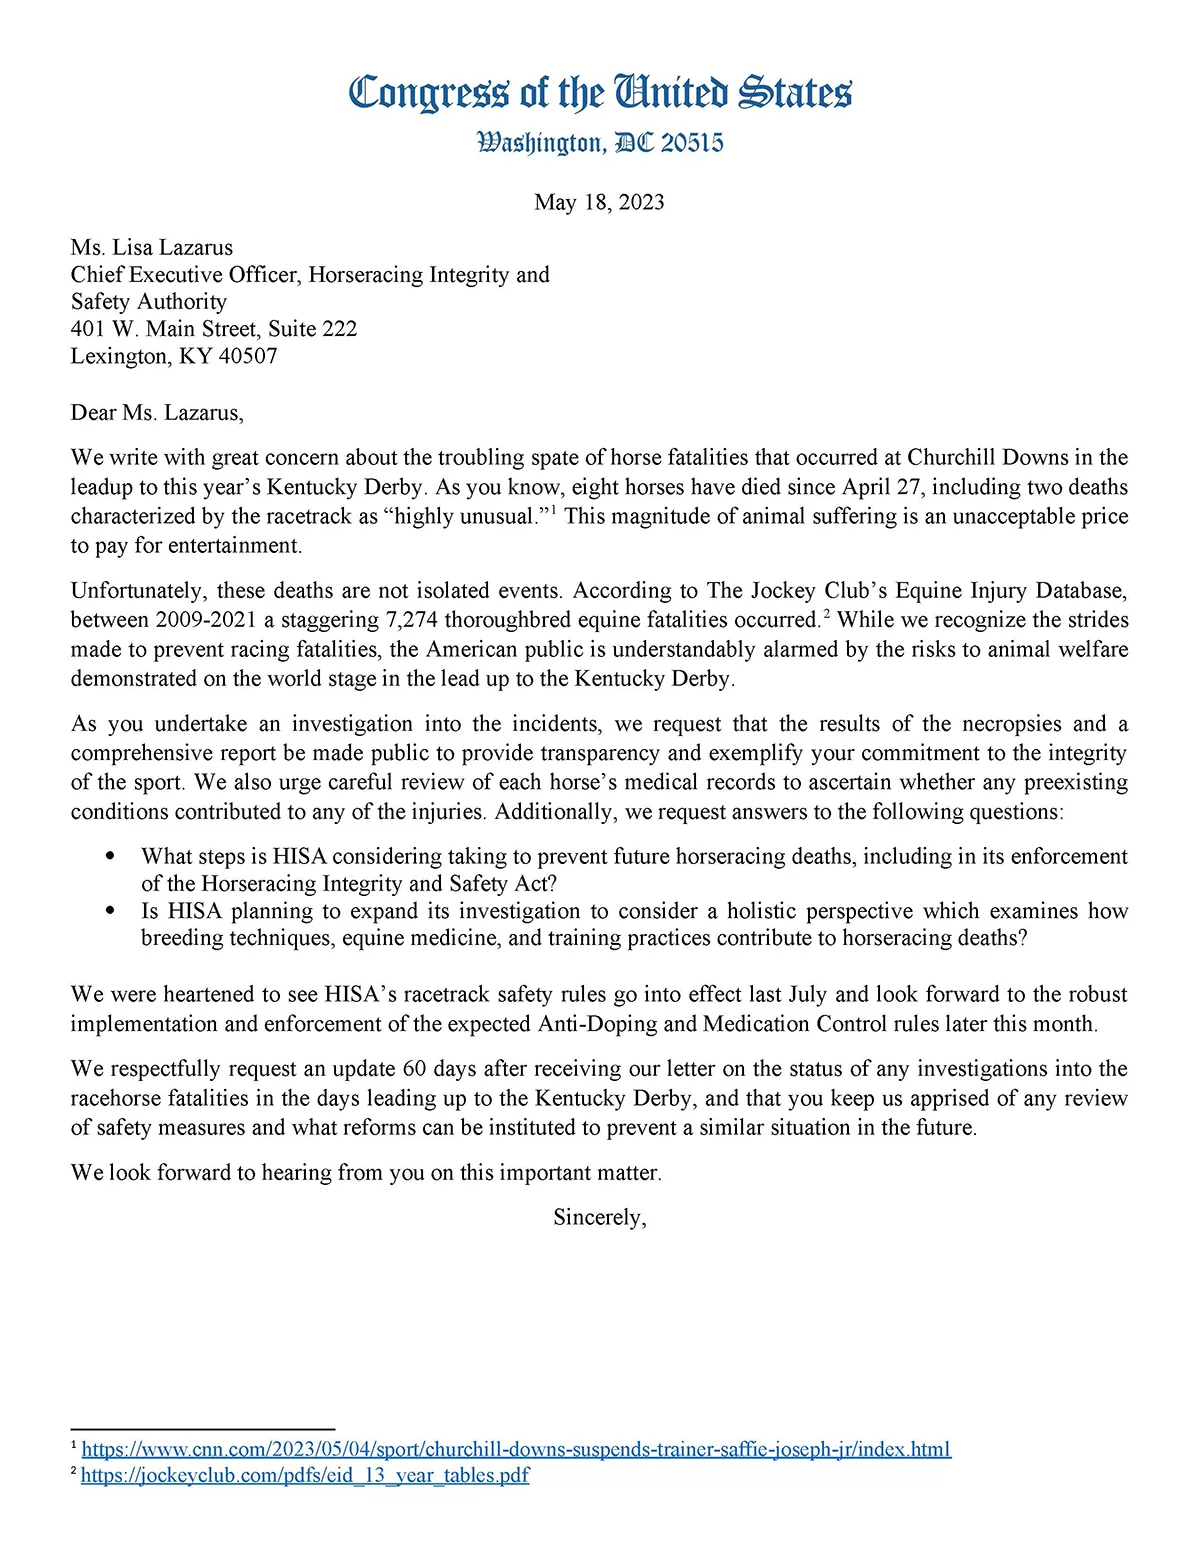 Bipartisan Congressional Letter Calls for Full Investigation into Horse Deaths Leading Up to Kentucky Derby